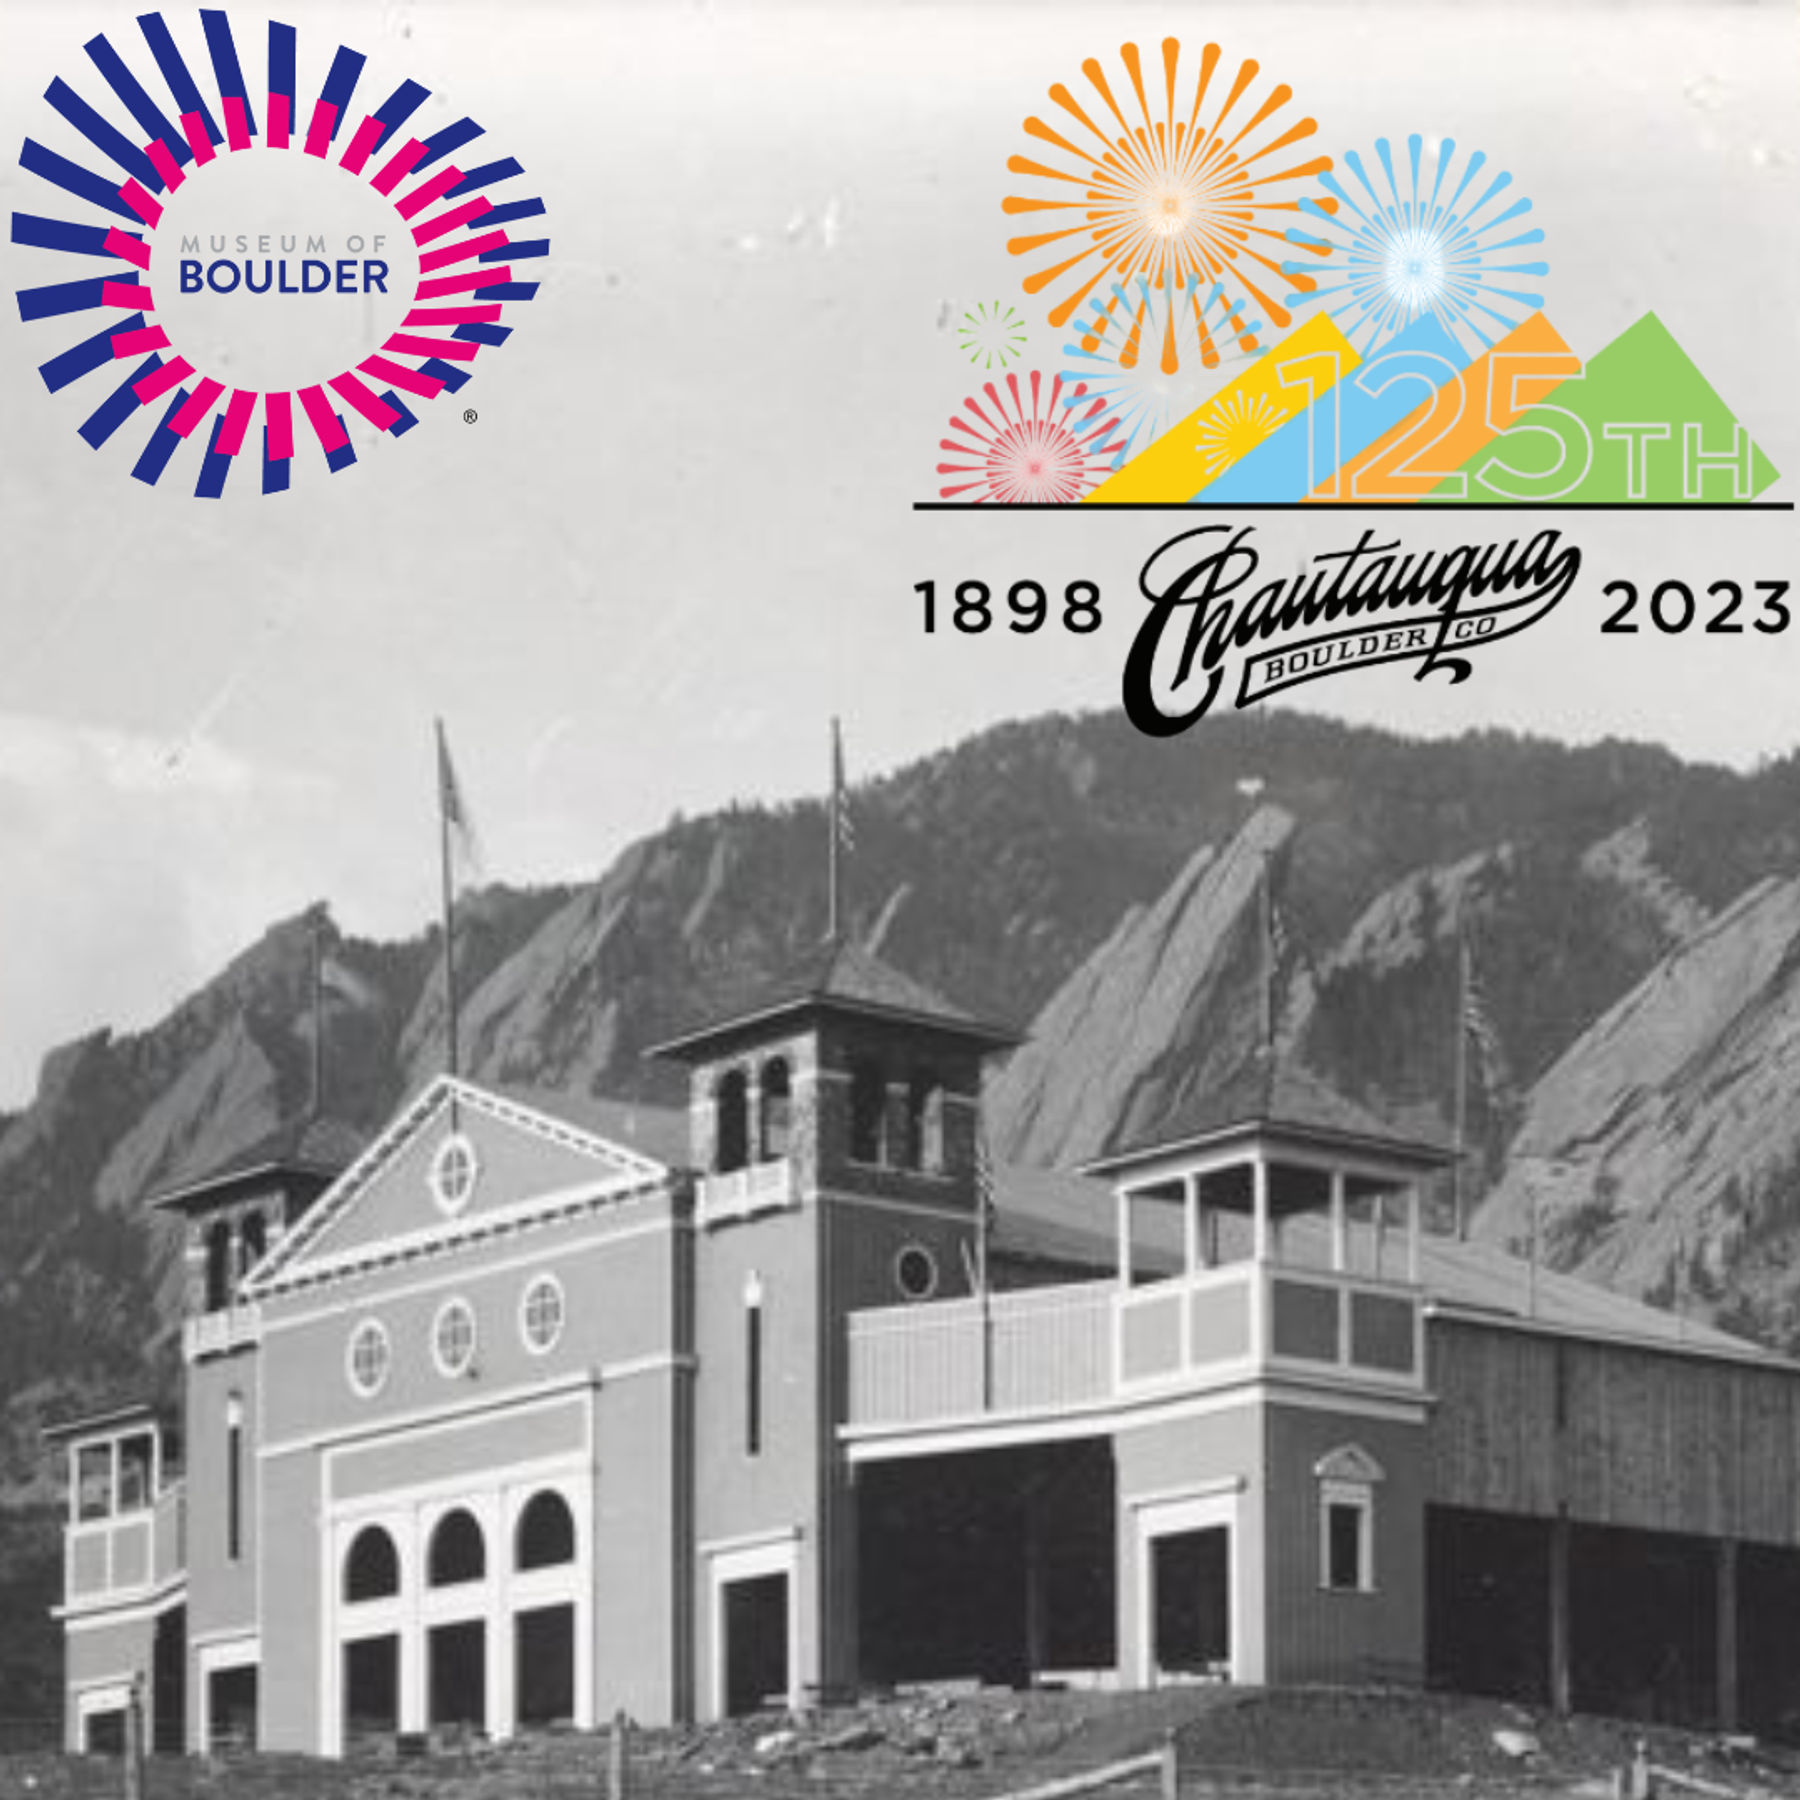 Chautauqua: 125 Years at the Heart of Boulder Exhibit at the Museum of Boulder